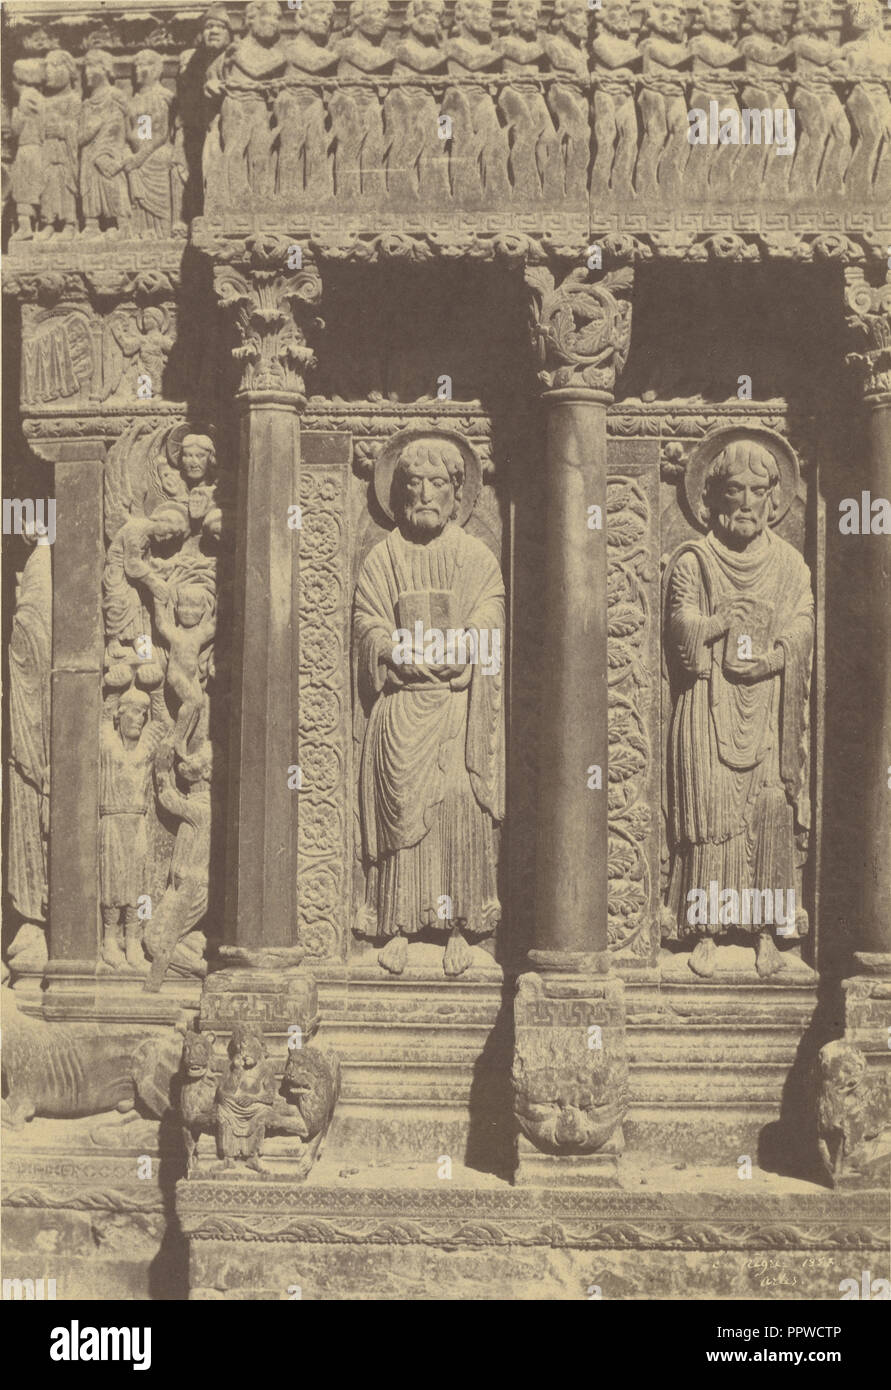 Right Side of the Main Portal of Saint Trophime, Arles, with Two Evangelists and the Damned; Charles Nègre, French, 1820 - 1880 Stock Photo